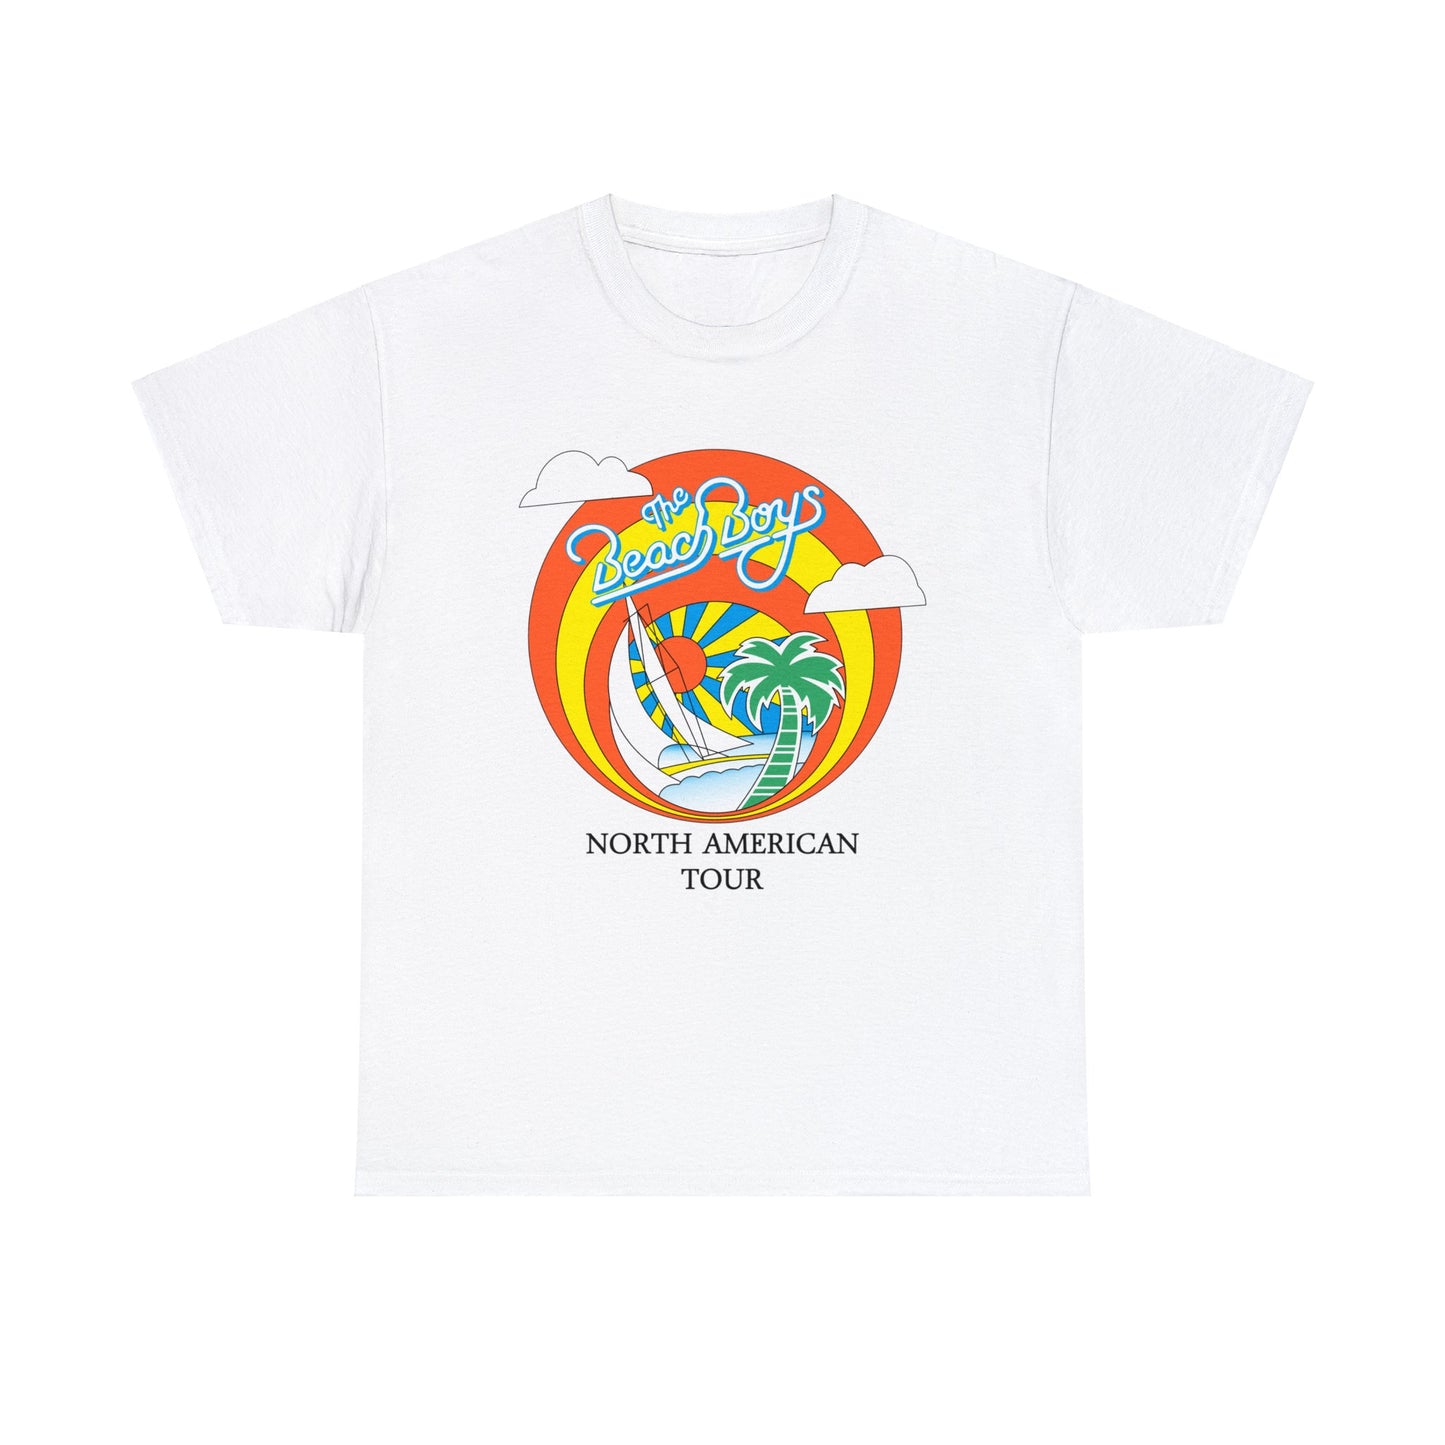 The Beach Boys North American Tour T-shirt for Sale